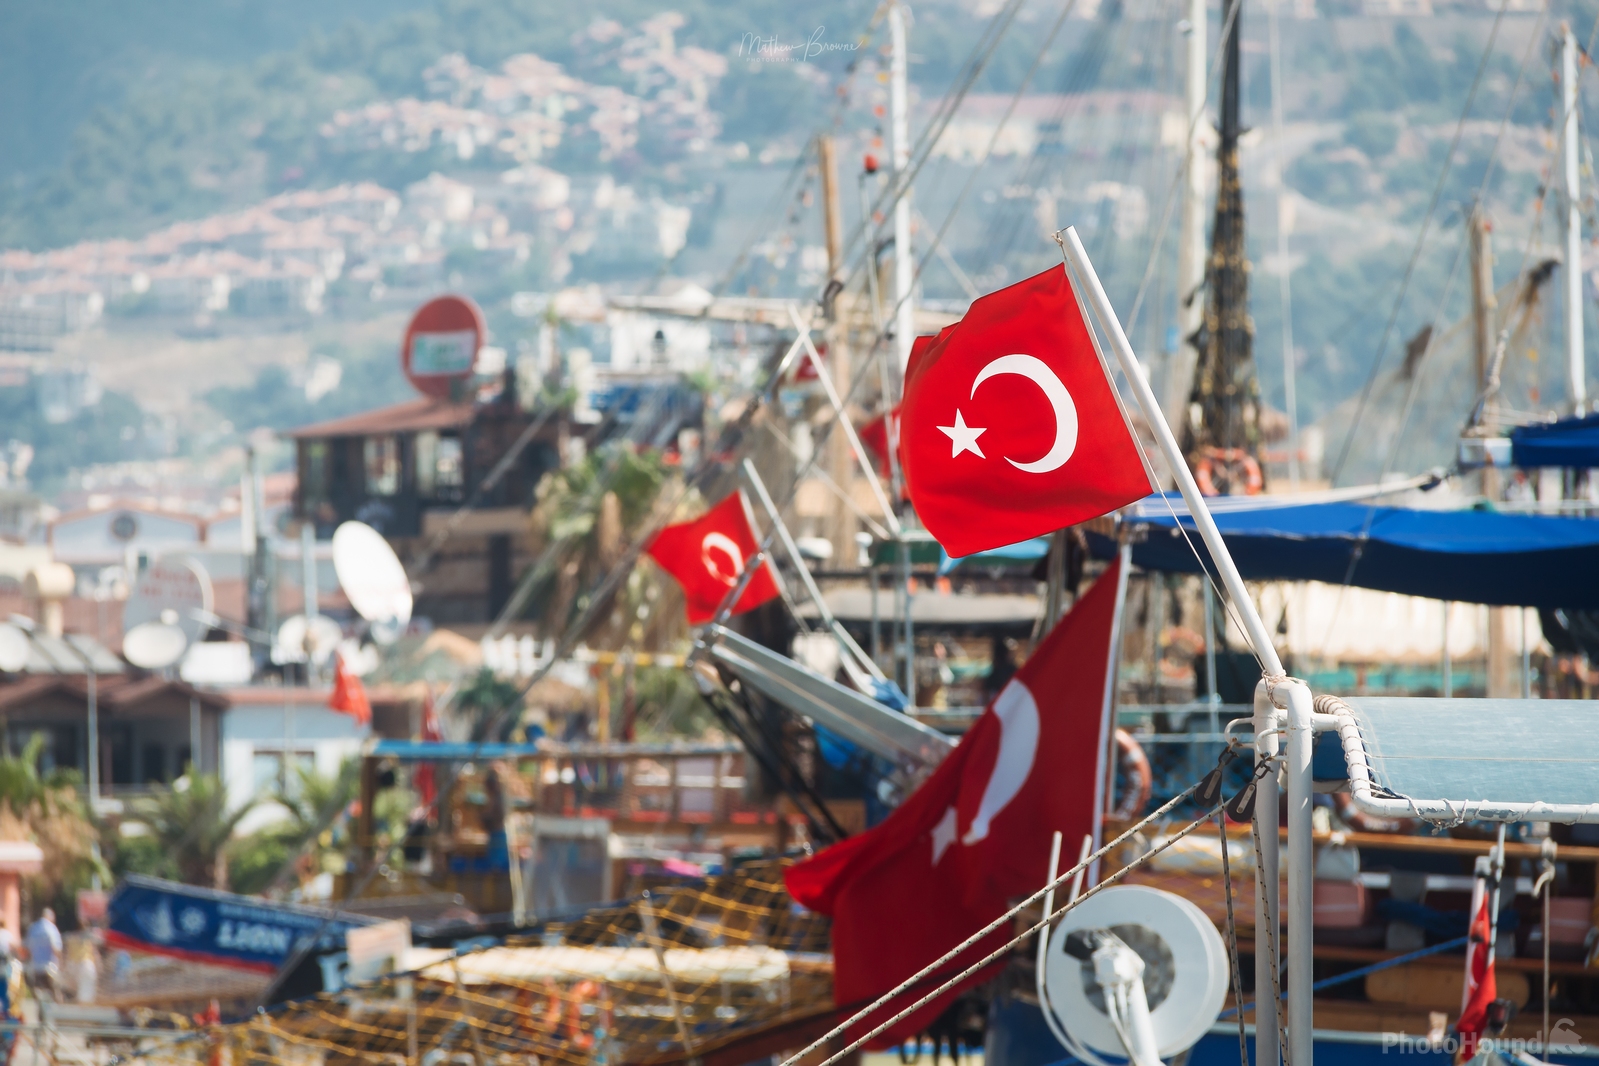 Image of Alanya Harbour by Mathew Browne